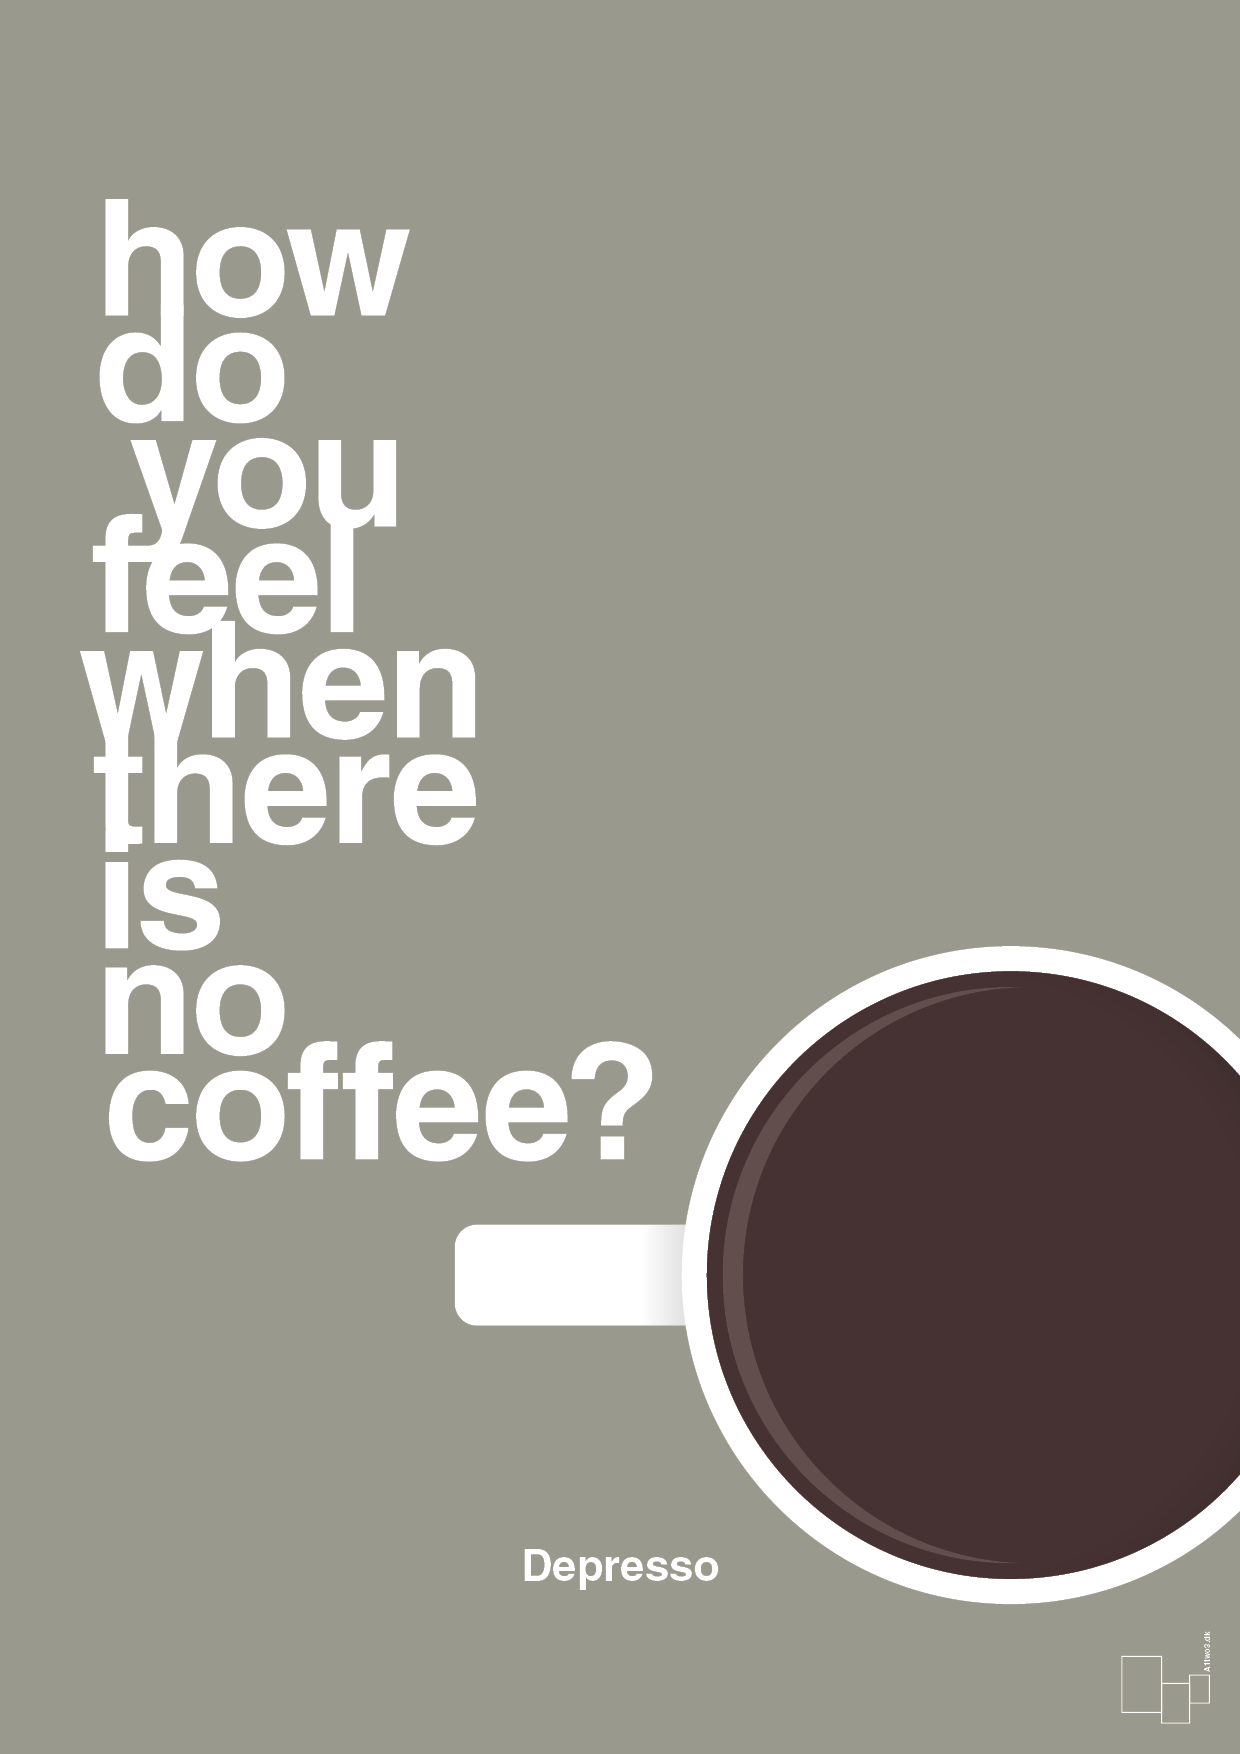 how do you feel when there is no coffee? depresso - Plakat med Mad & Drikke i Battleship Gray